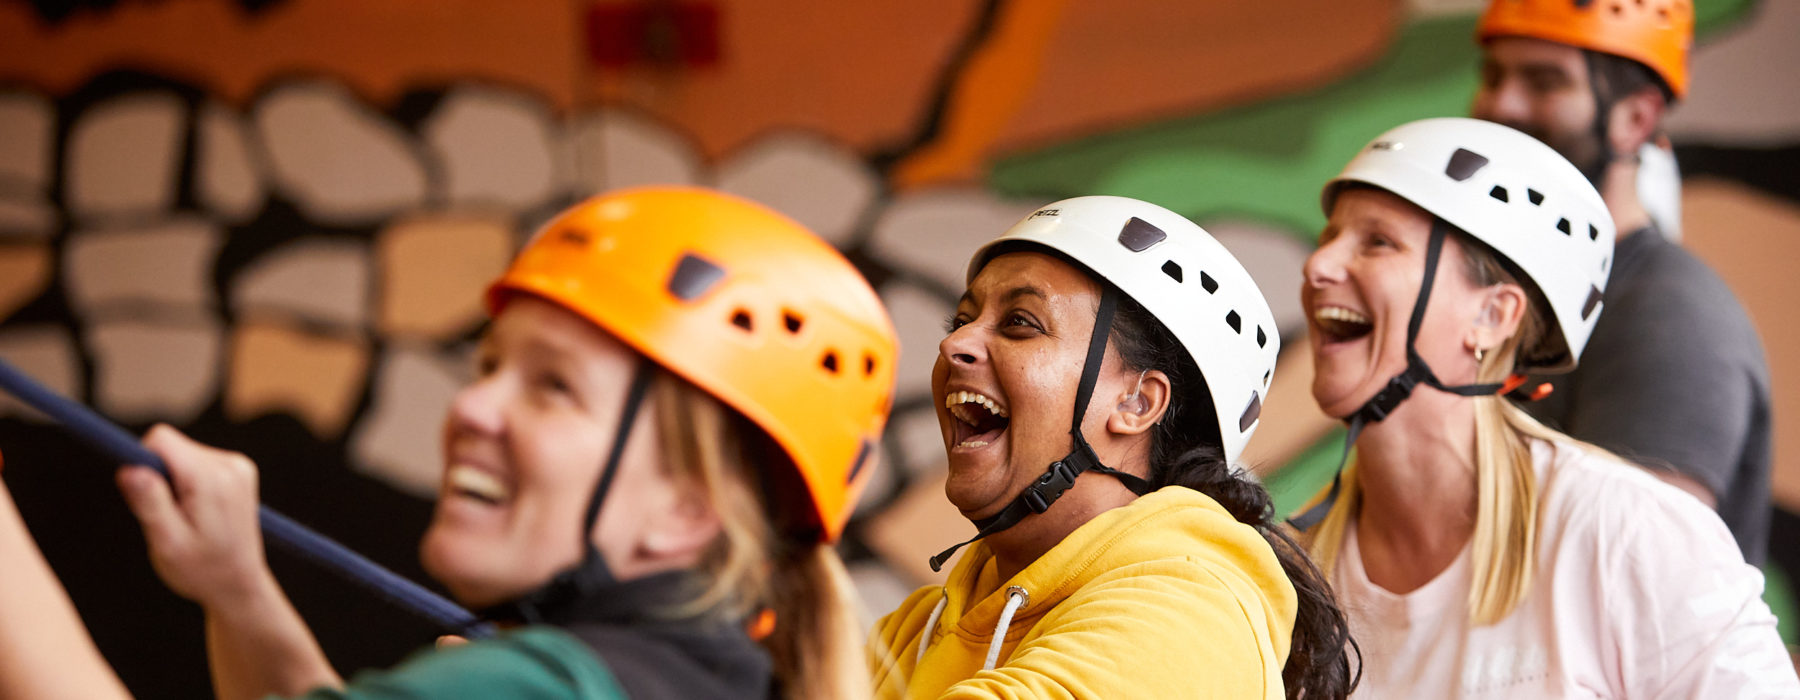 A group of people in helmets smile and hold a rope